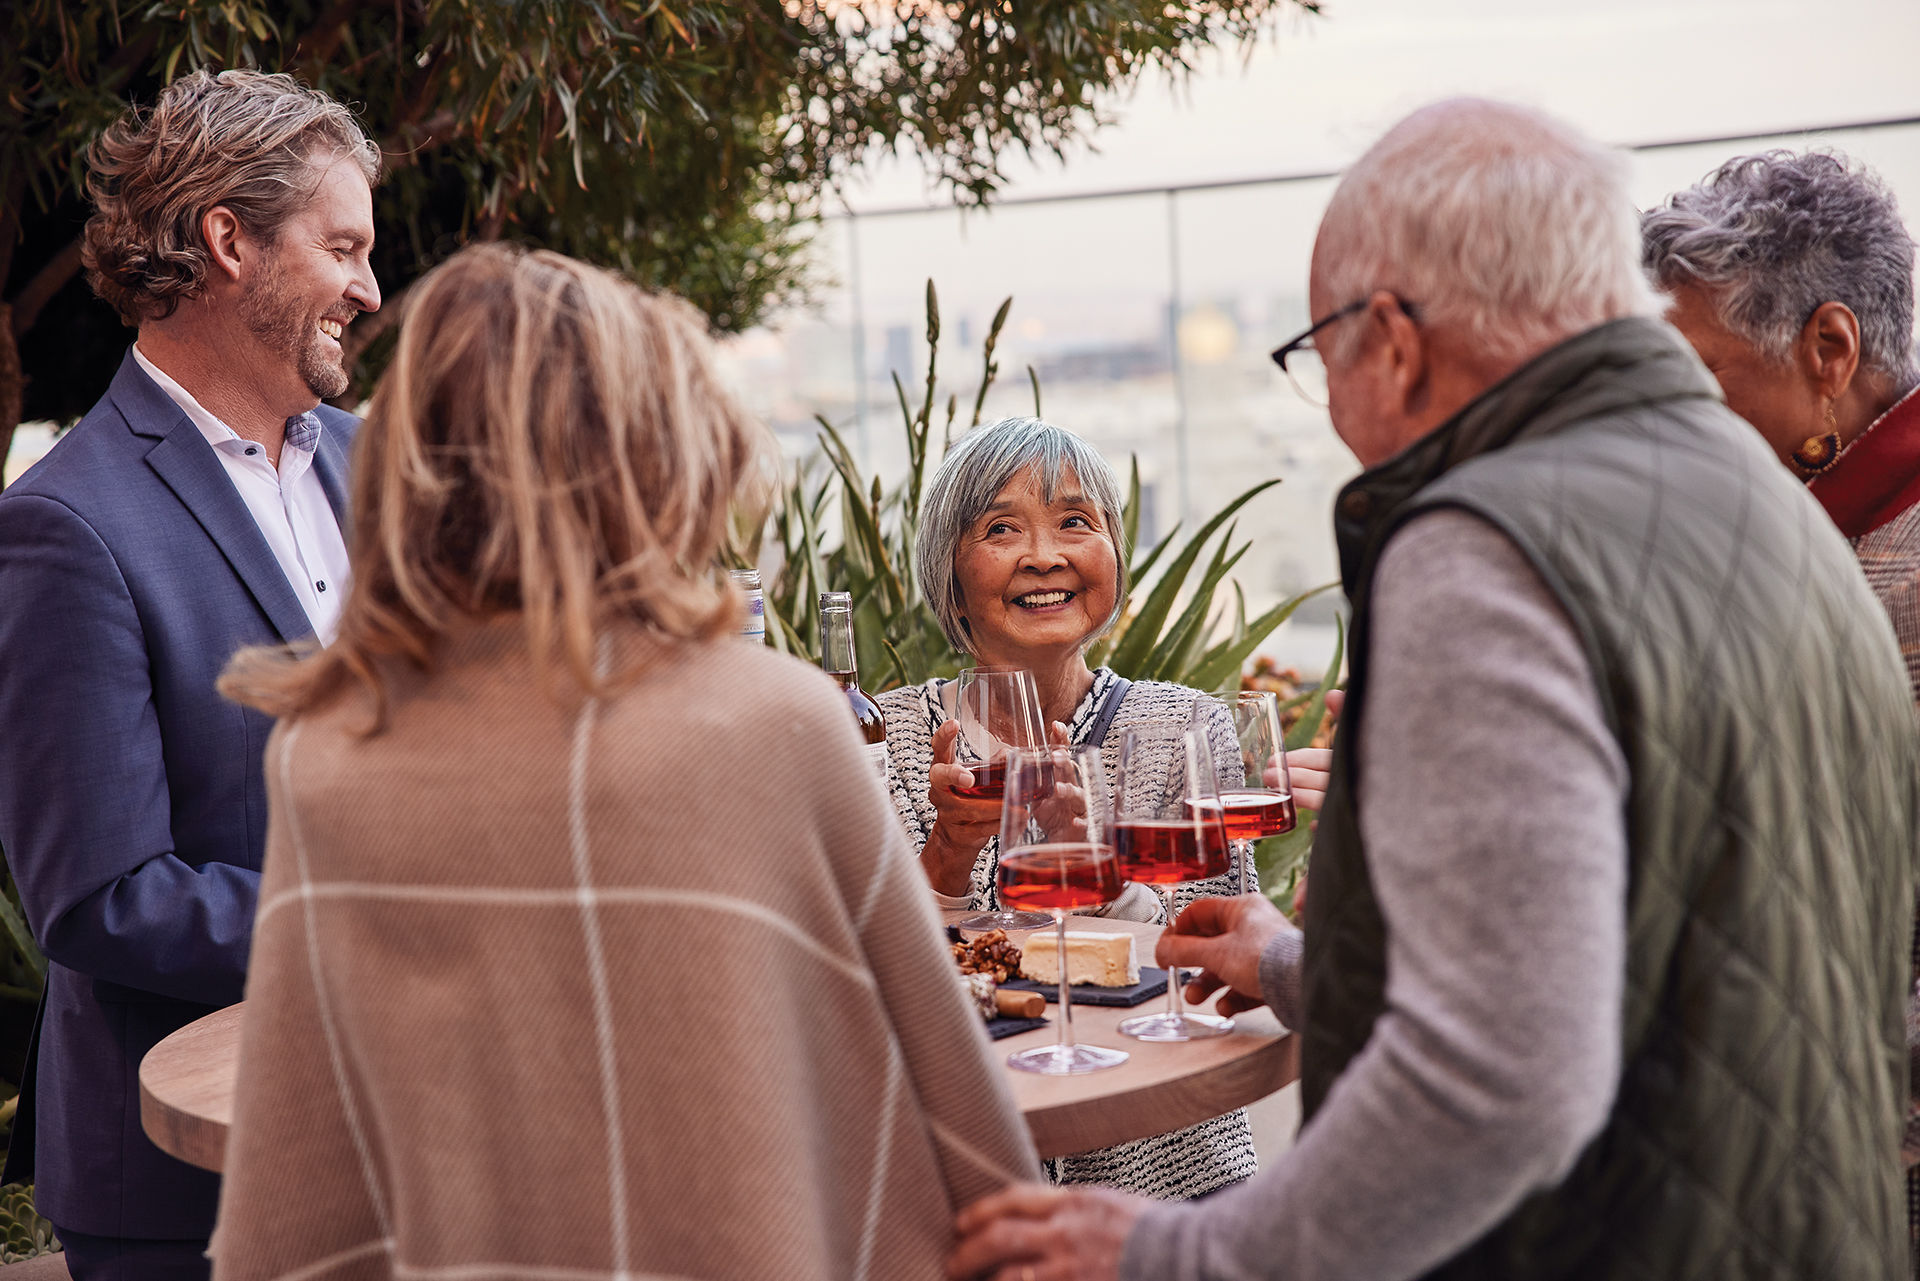 A smiling group of seniors enjoy wine and conversation